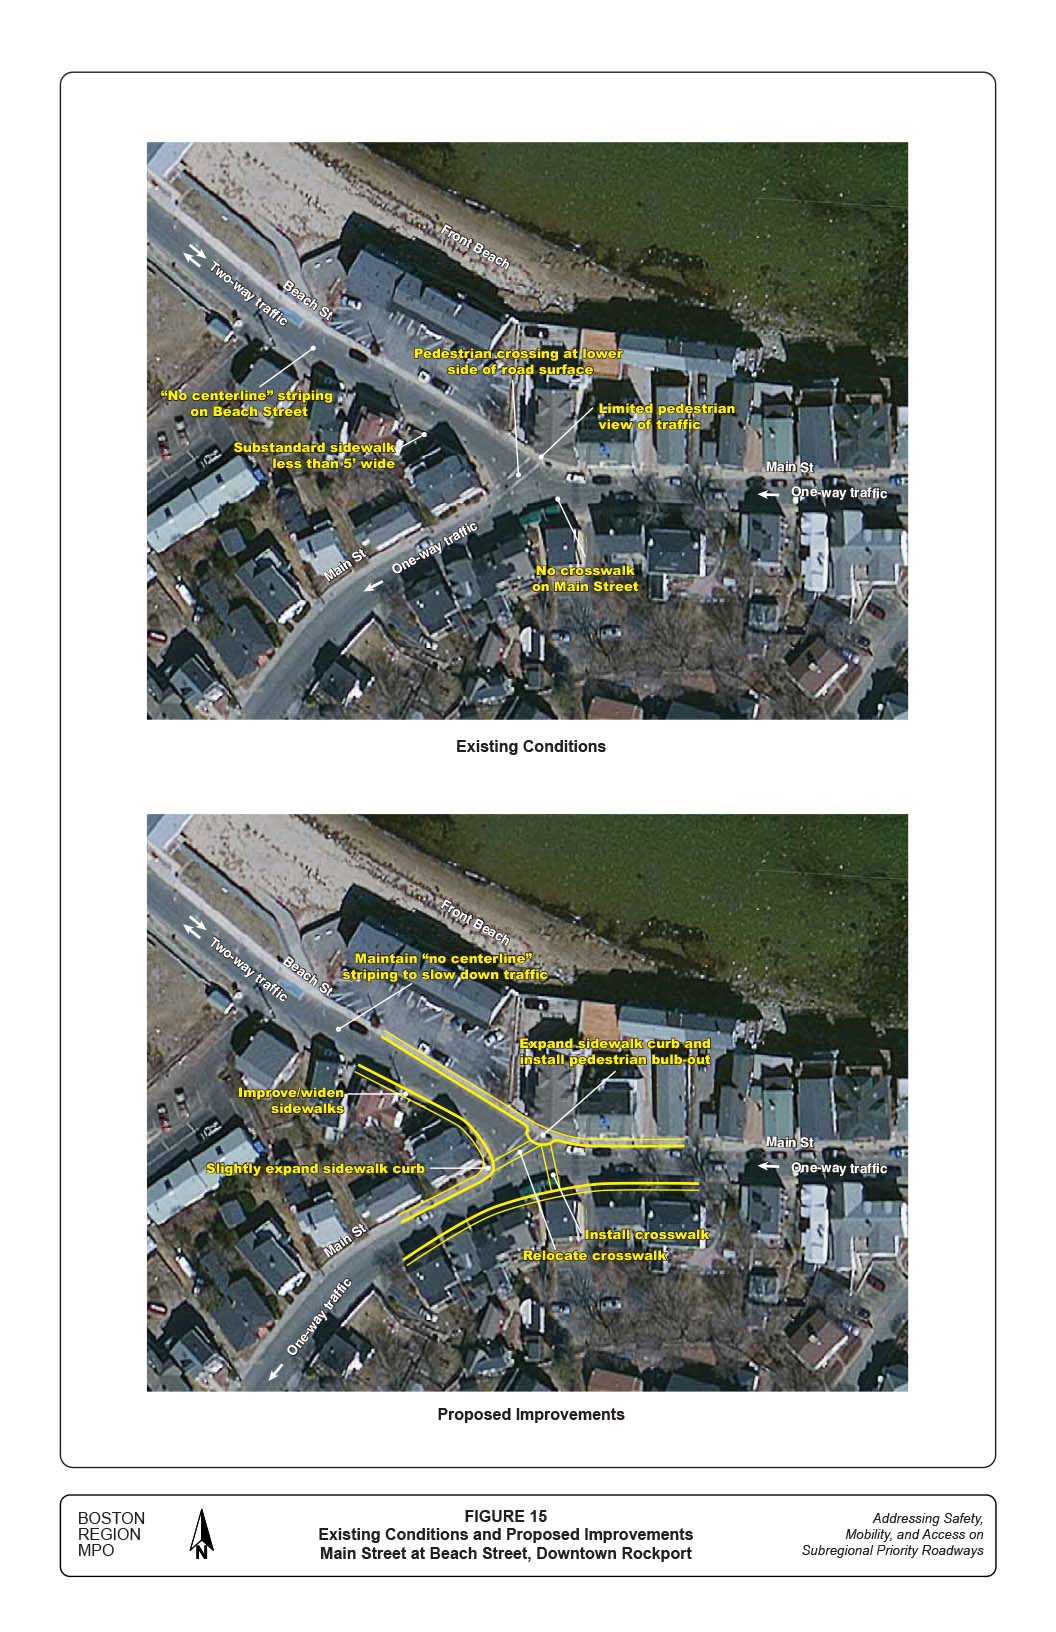 FIGURE 15. Existing Conditions and Proposed Improvements Main Street at Beach Street, Downtown Rockport
1)	The first image, Existing Conditions, cites (in clock-wise direction): Pedestrian crossing at lower side of road surface; limited pedestrian view of traffic; no crosswalk on Main Street; substandard sidewalk less than 5’ wide; and “no centerline” striping on Beach Street.
2)	The second image, Proposed Improvements, cites (in a clock-wise direction): Maintain “no centerline” striping to slow down traffic; expand sidewalk curb and install pedestrian bulb-out; Install crosswalk;  Relocate crosswalk; Slightly expand sidewalk curb; Improve/widen sidewalks; and maintain “no centerline” striping to slow down traffic. 